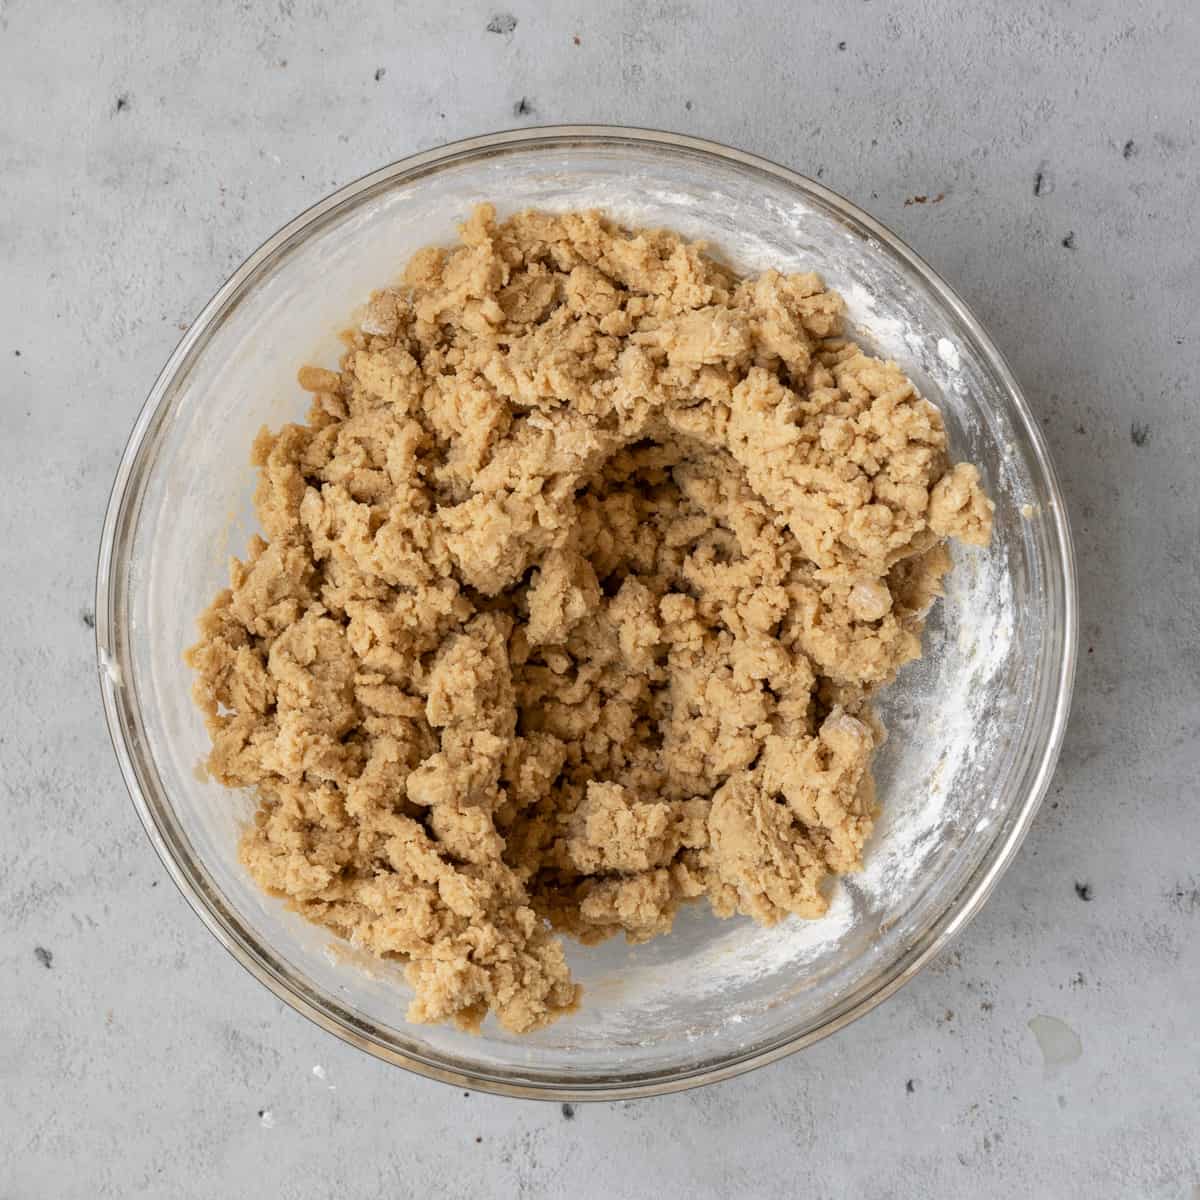 the completed cookie dough in a glass bowl on a grey background